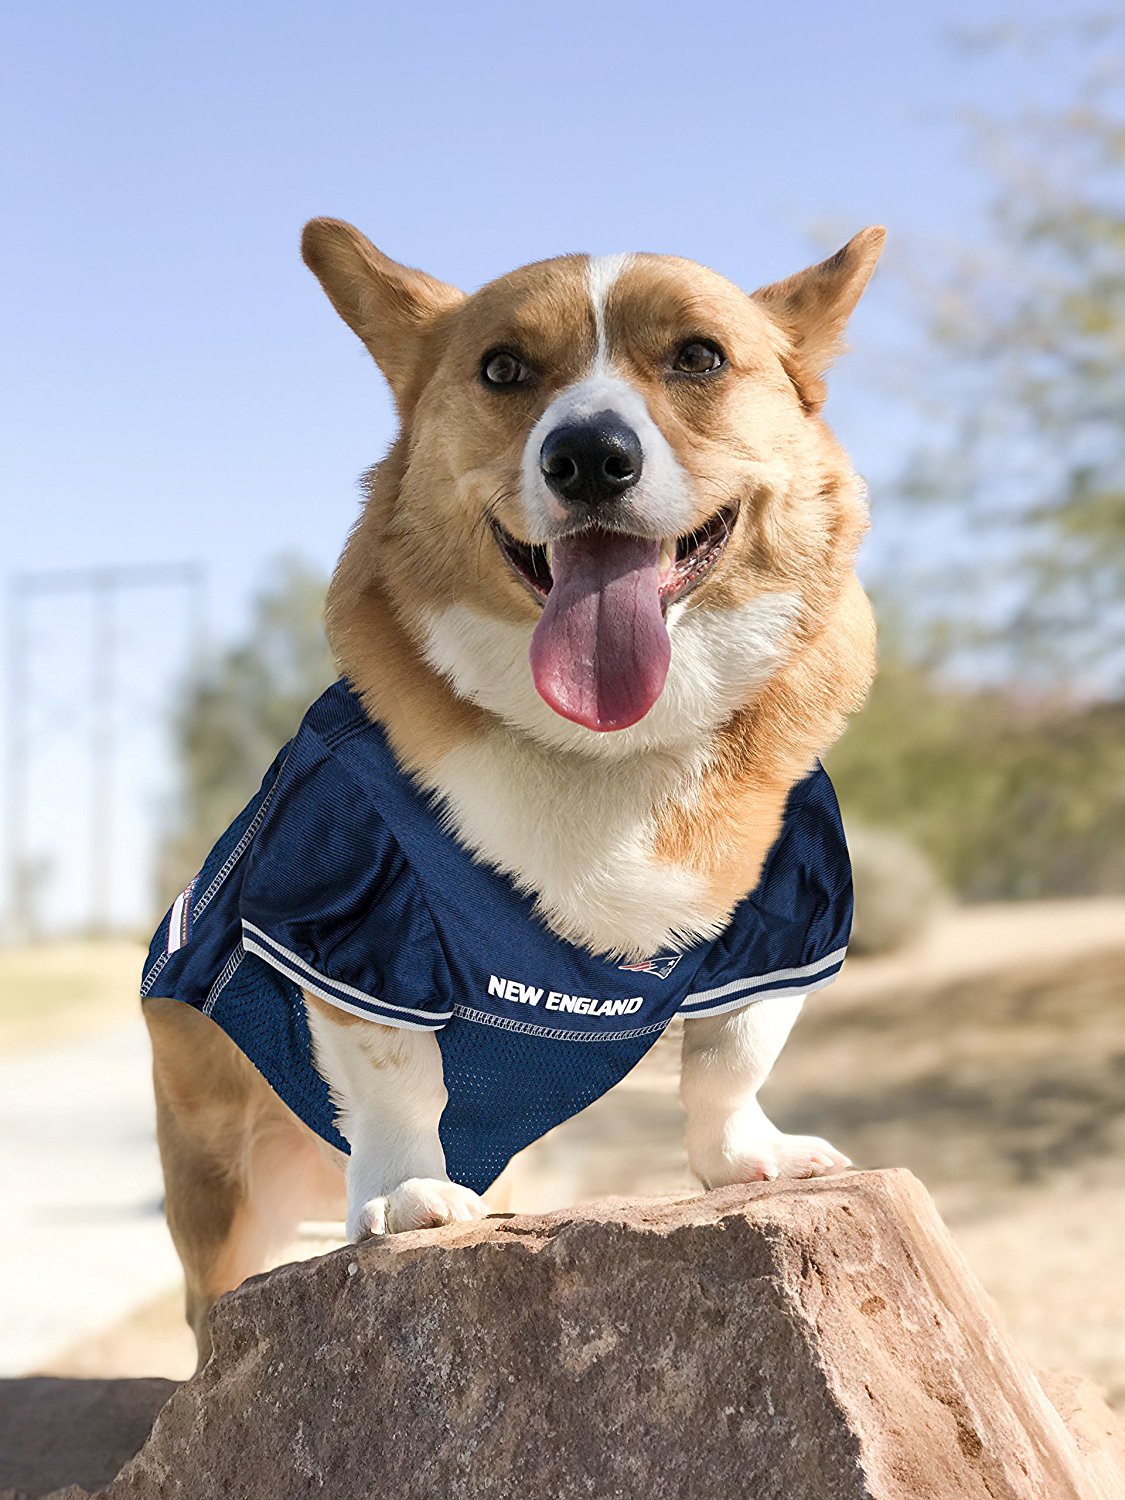 Pets First NFL New England PatriotsLicensed Mesh Jersey for Dogs and Cats - Small - image 5 of 6